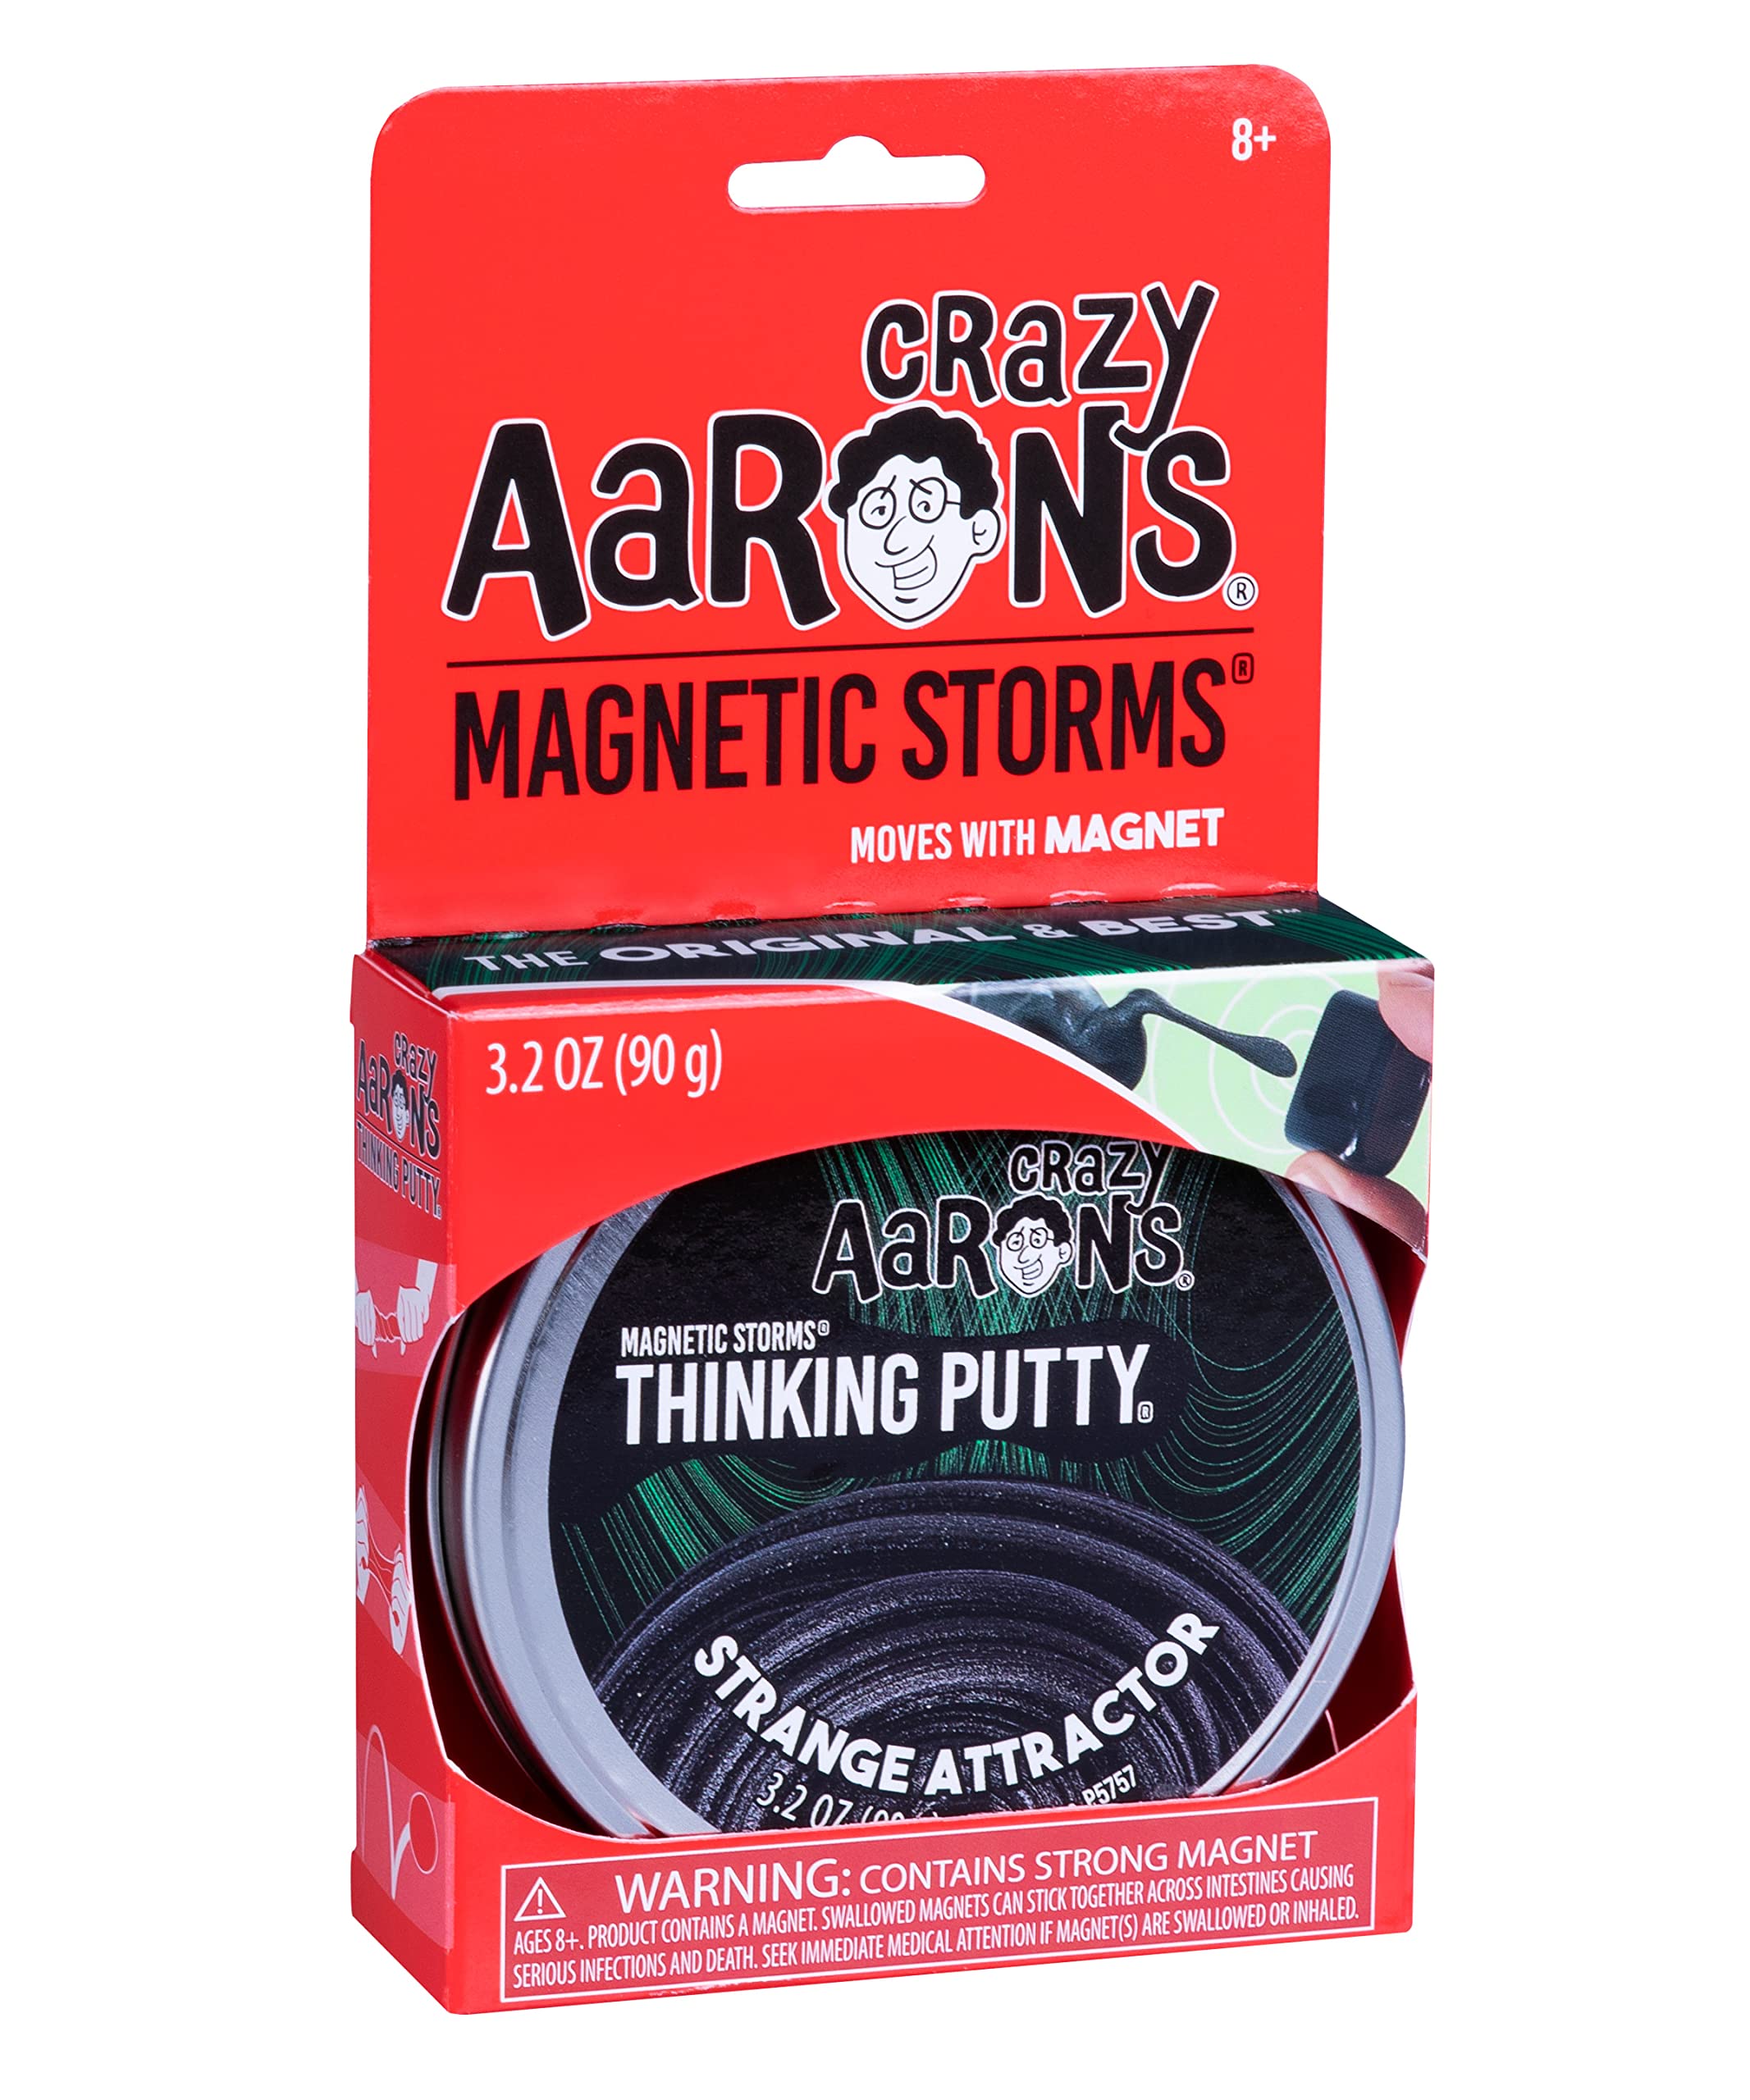 Crazy Aaron’s Magnetic Storms® Strange Attractor Thinking Putty®